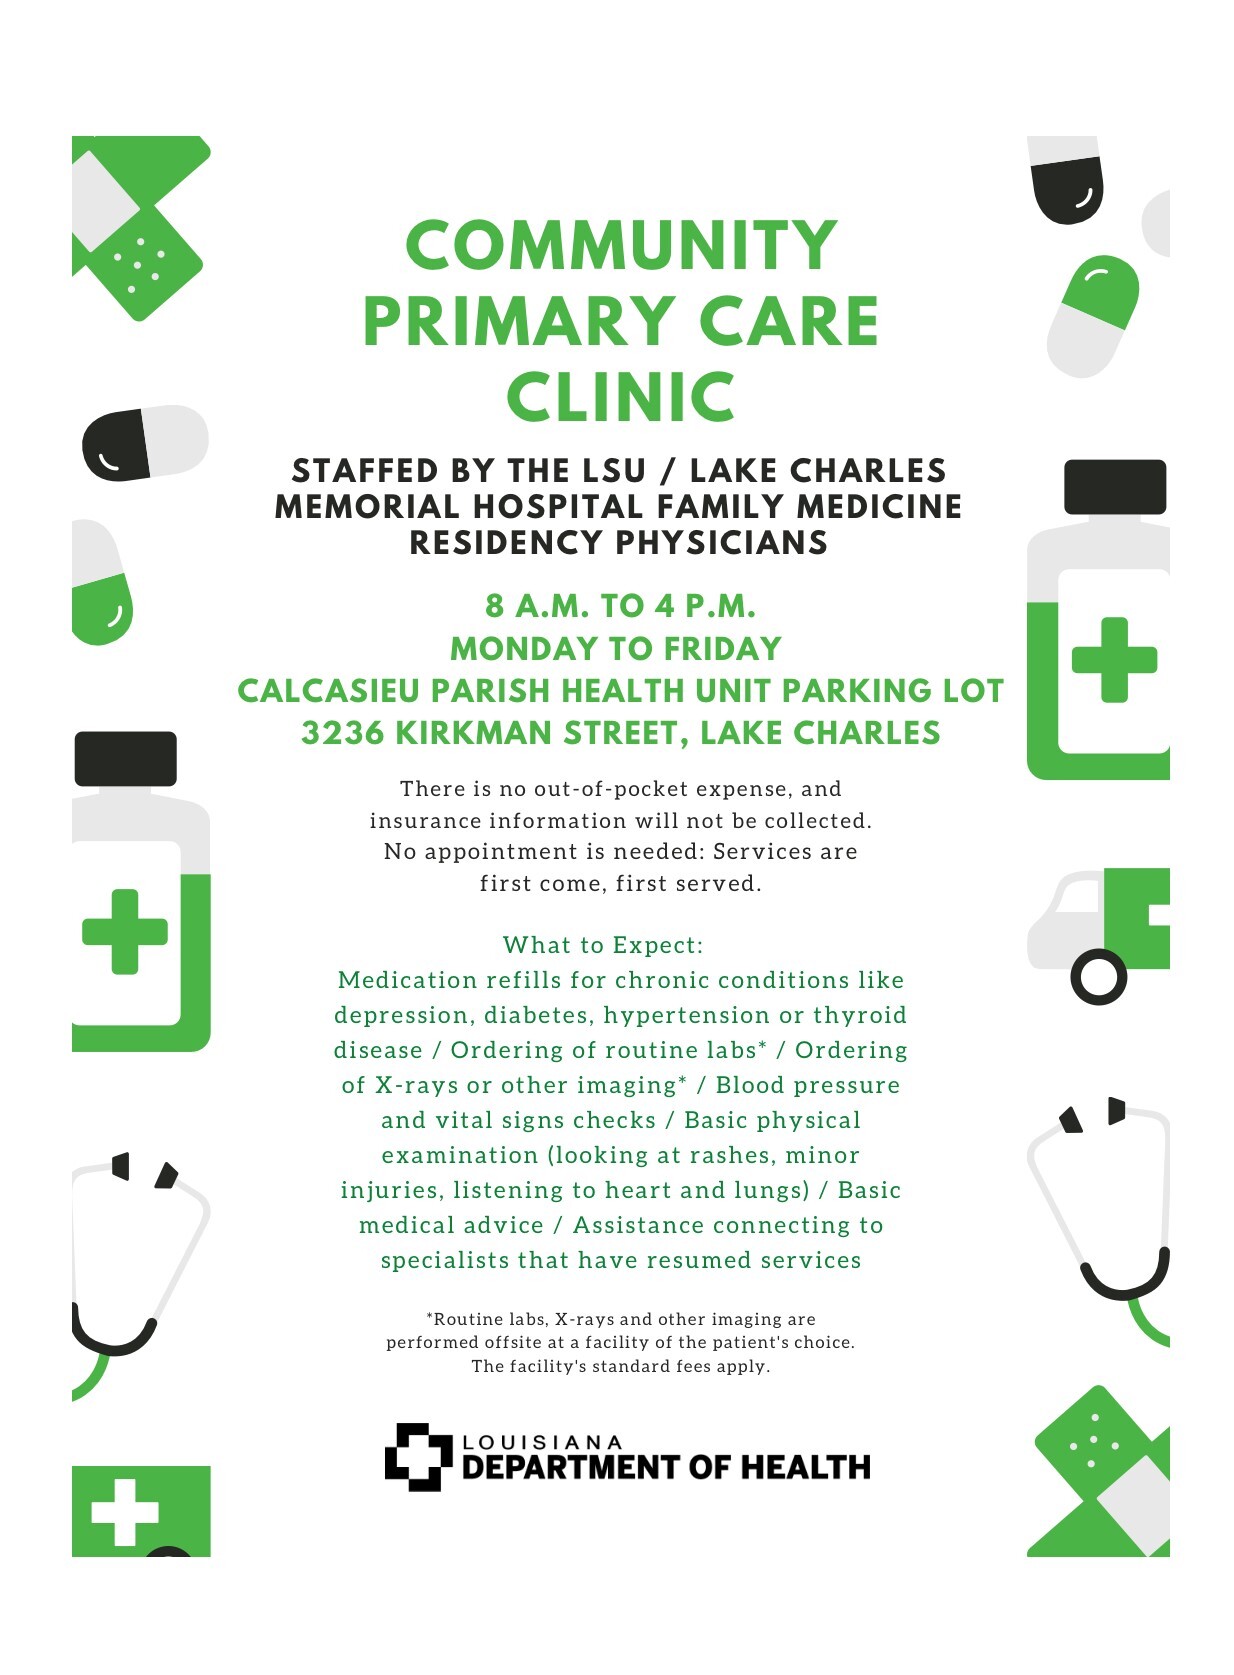 Community Primary Care Clinic in Lake Charles